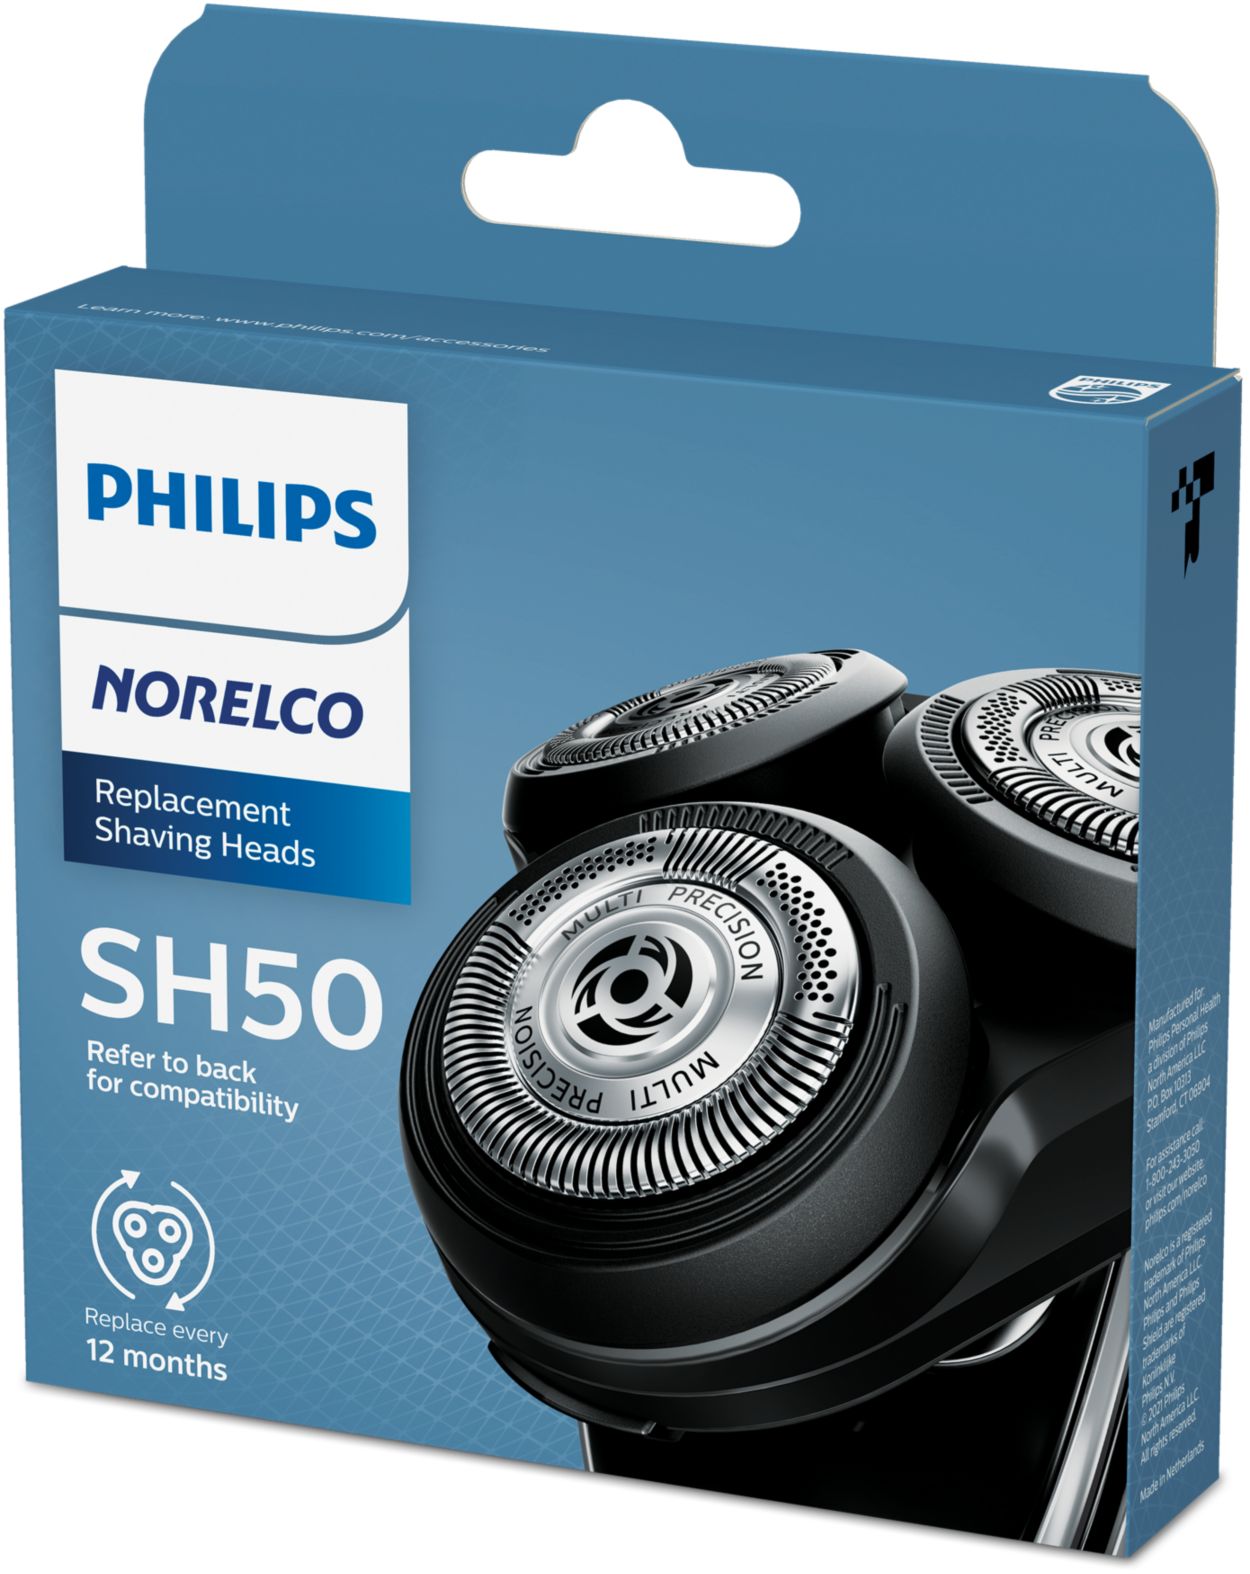 Series Heads SH50 Shaving Philips 5000 Norelco Replacement